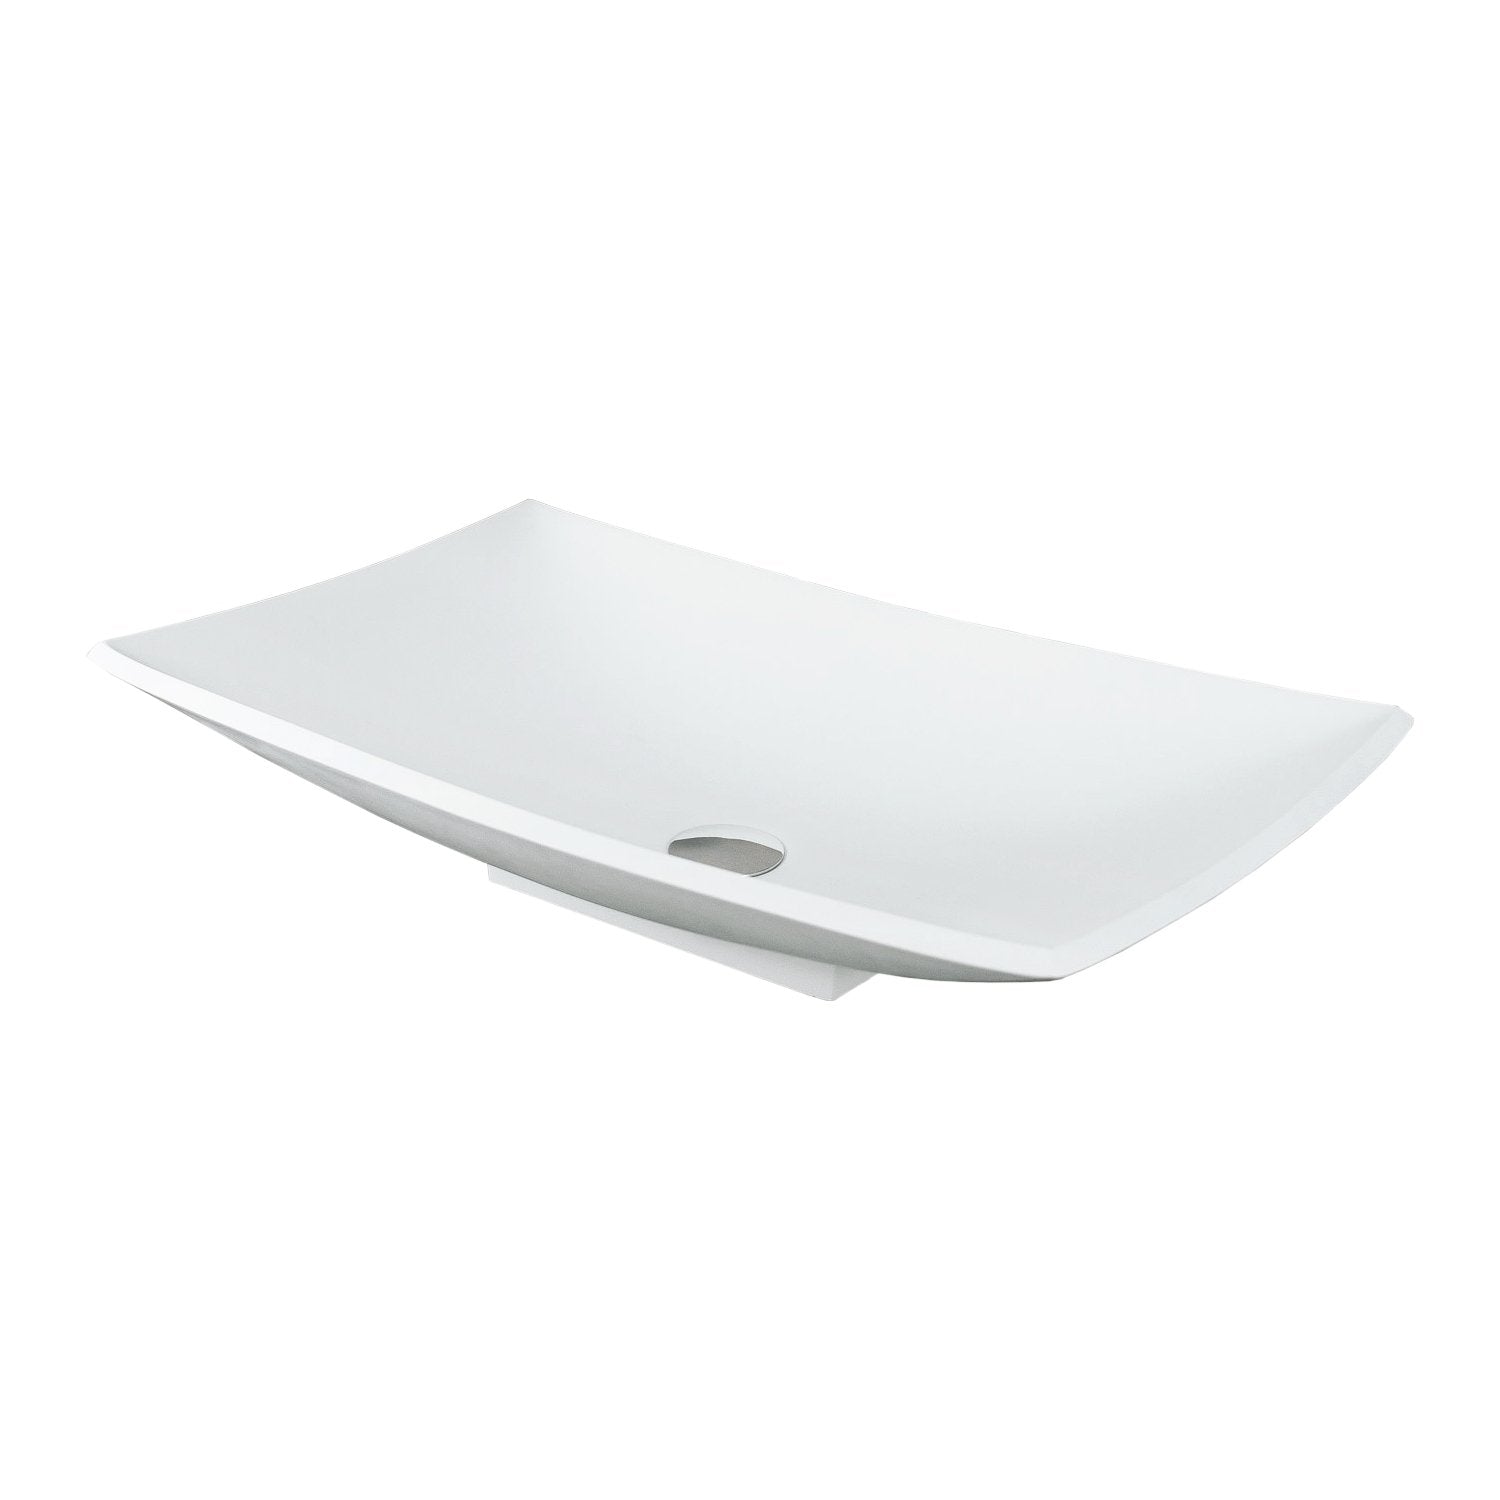 DAX Solid Surface Rectangle Single Bowl Bathroom Vessel Sink, White Matte Finish, 25-2/5 x 15-3/8 x 5-3/4 Inches (DAX-AB-1325)